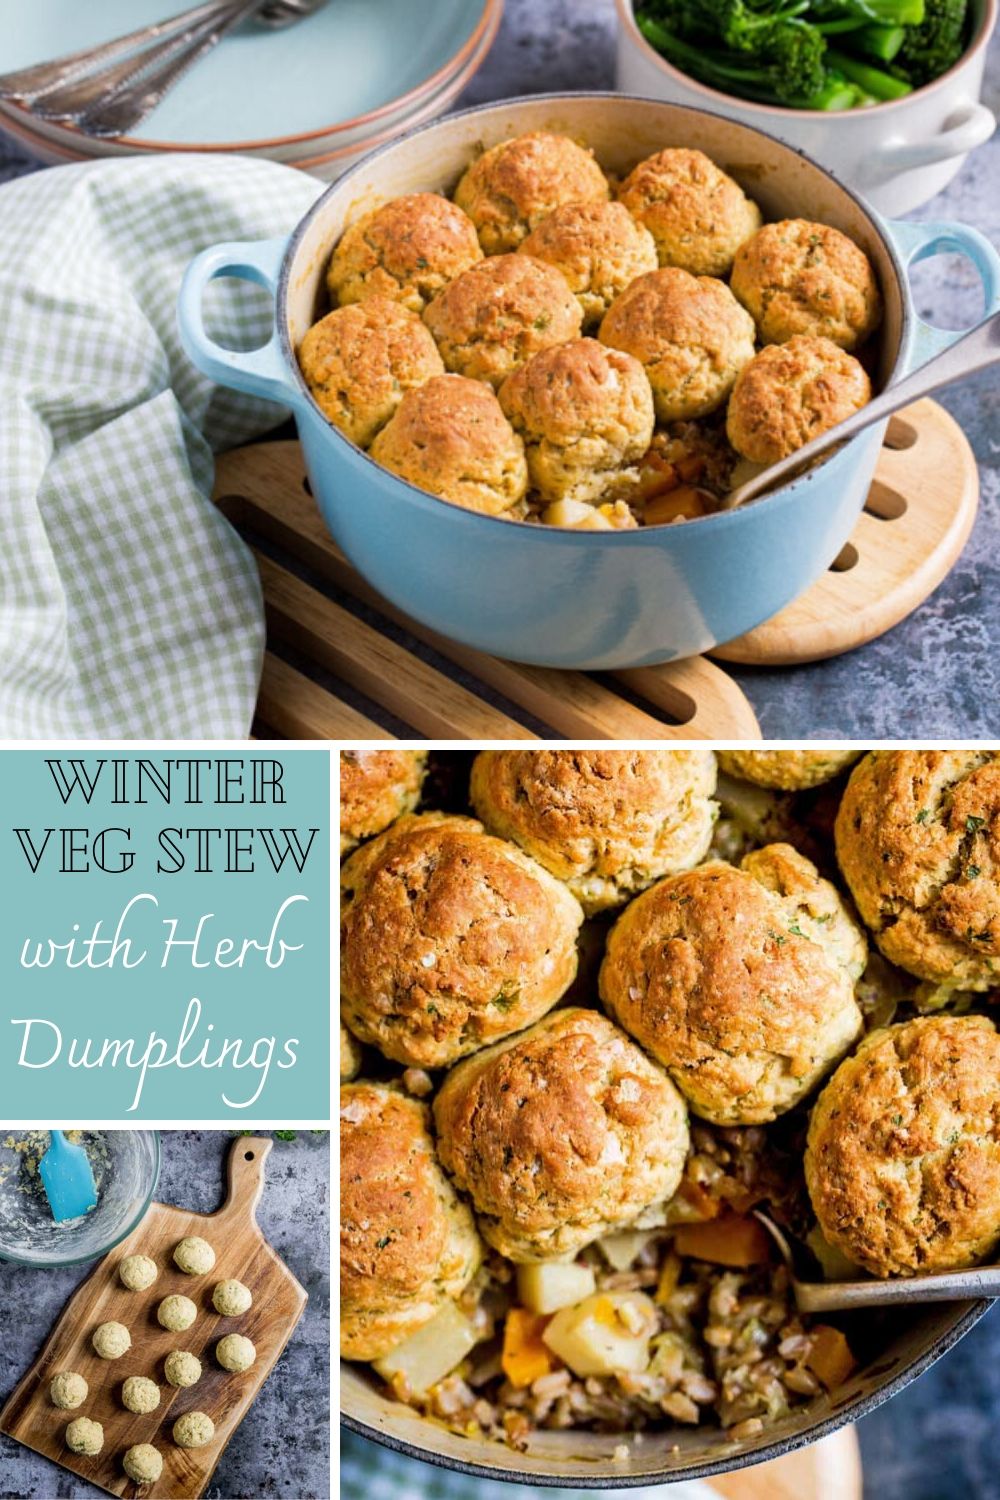 Hearty and delicious, this vegetable stew topped with crisp, vegan and gluten free herb dumplings is the perfect winter comfort food! #vegetables #casserole #stew #veganrecipes #vegandumplings #dumplings | Recipe on thecookandhim.com